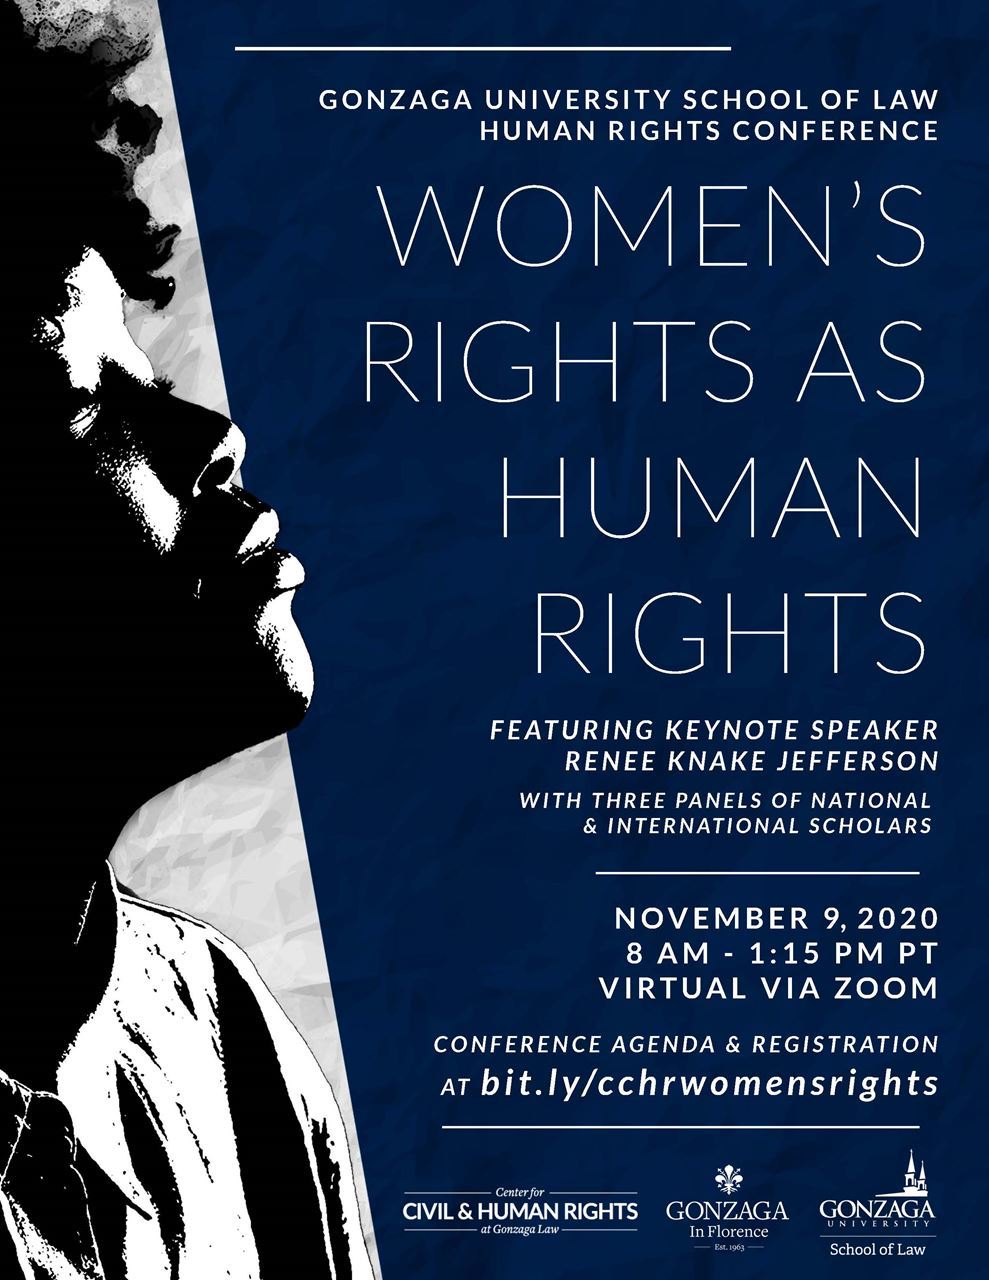 Global Alliance for Justice Education - Women's Rights as Human Rights  symposium November 9 via Zoom